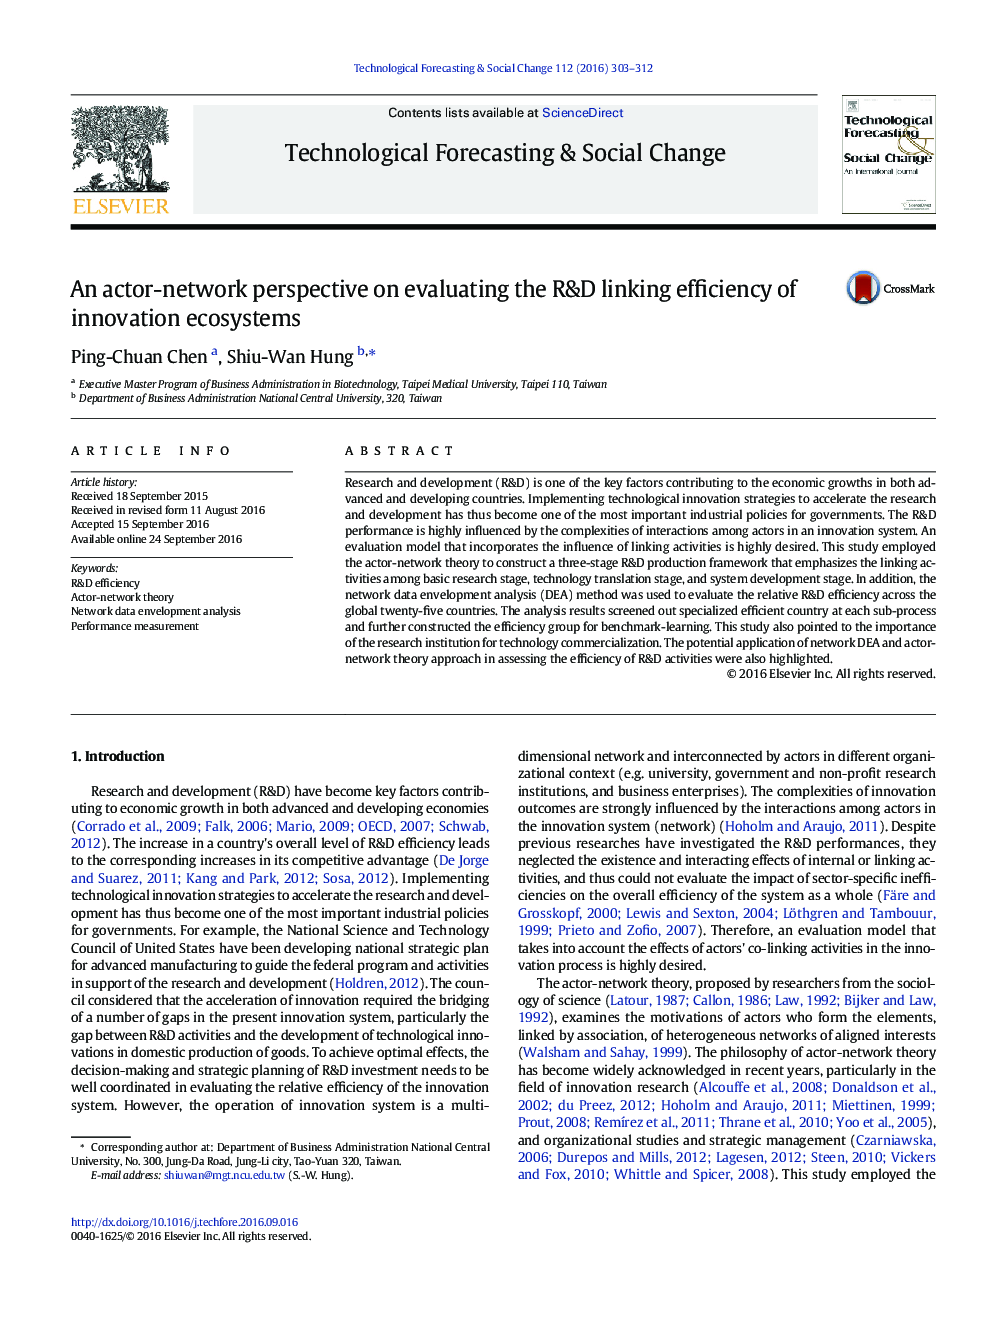 An actor-network perspective on evaluating the R&D linking efficiency of innovation ecosystems